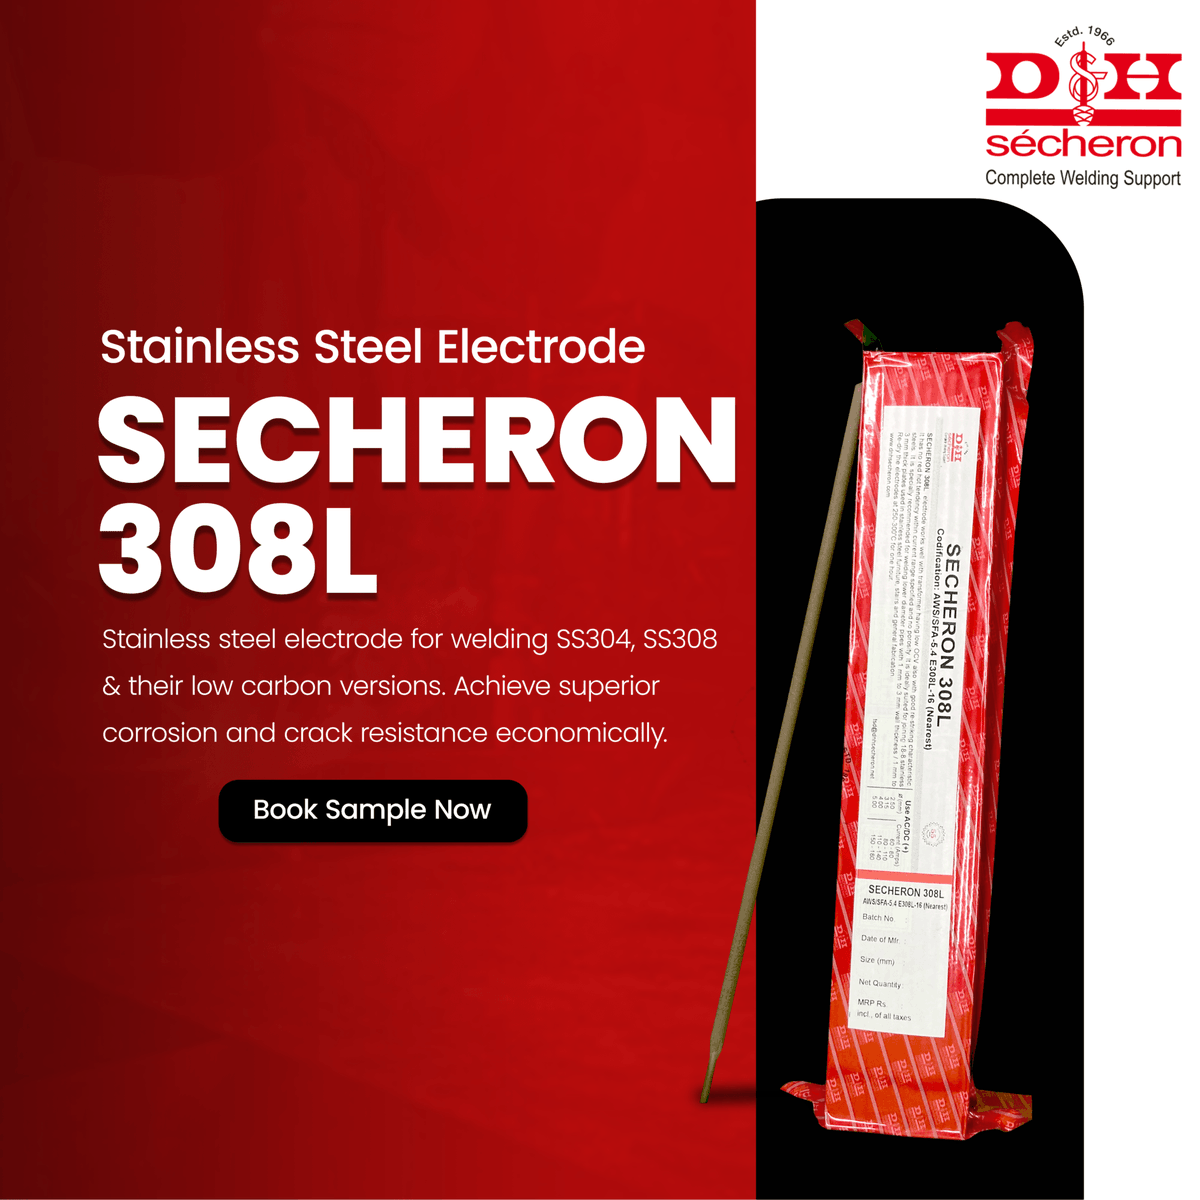 Welding excellence with SECHERON 308L. The ideal choice for SS304, SS308, and low carbon versions. Superior corrosion and crack resistance, meeting customer needs economically. Perfect for transformers with low OCV, and it has excellent re-striking characteristics.